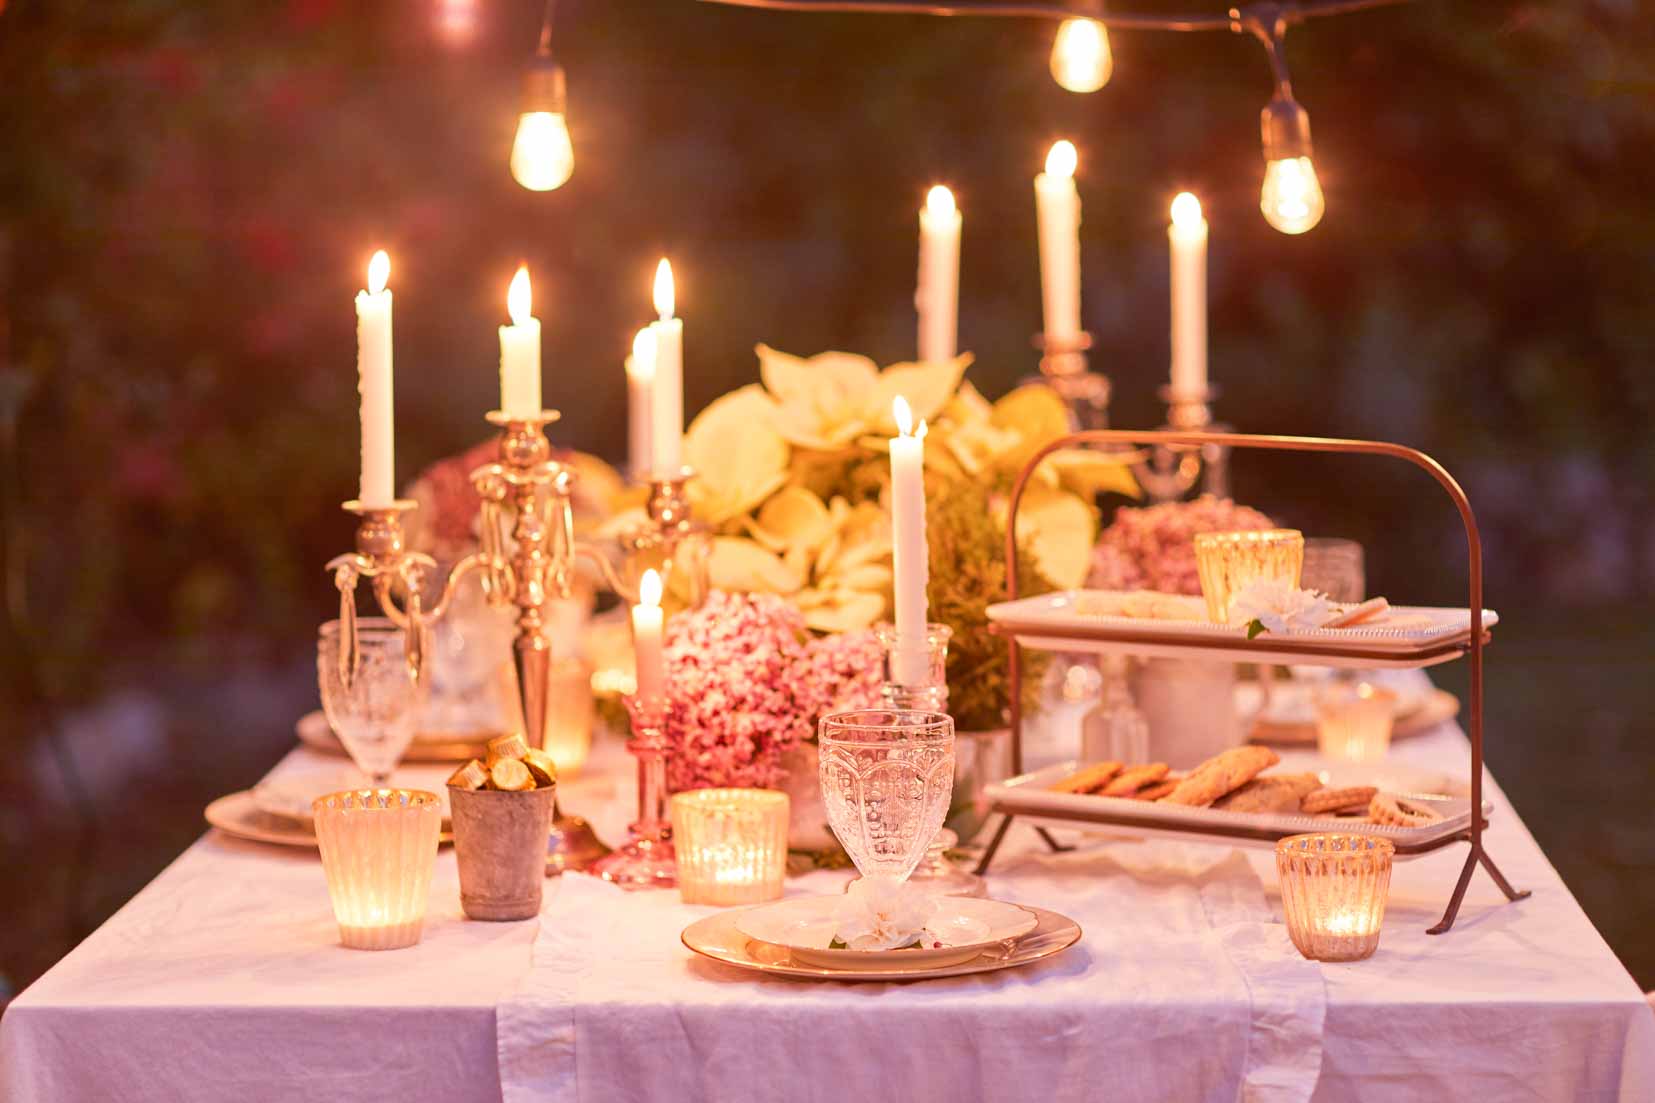 A San Francisco Christmas Dining outdoors! Get inspired to create a cozy night celebrating the holidays. #christmas #holidaydining #wintertable